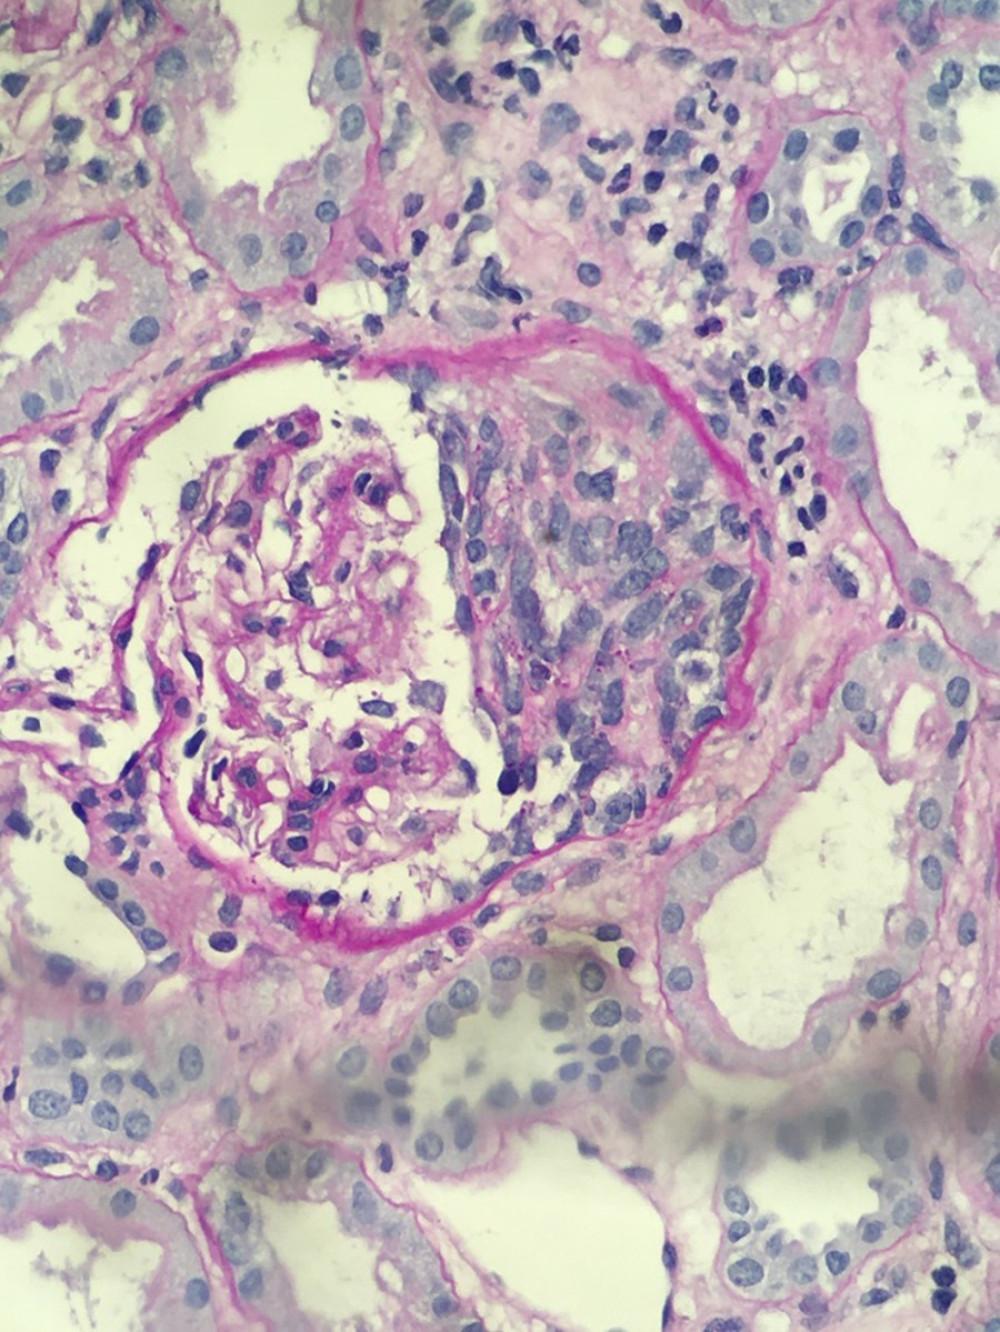 Case 1. Active nephritis shown on kidney biopsy. Native kidney biopsy showing the presence of crescent in an affected glomerulus (magnified ×10, high-power field, stained with periodic acid-Schiff). In a total of 20 glomeruli sampled, there were 8 fibrocellular crescents, 4 of which had segmental fibrinoid necrosis and segmental sclerosis (not shown).